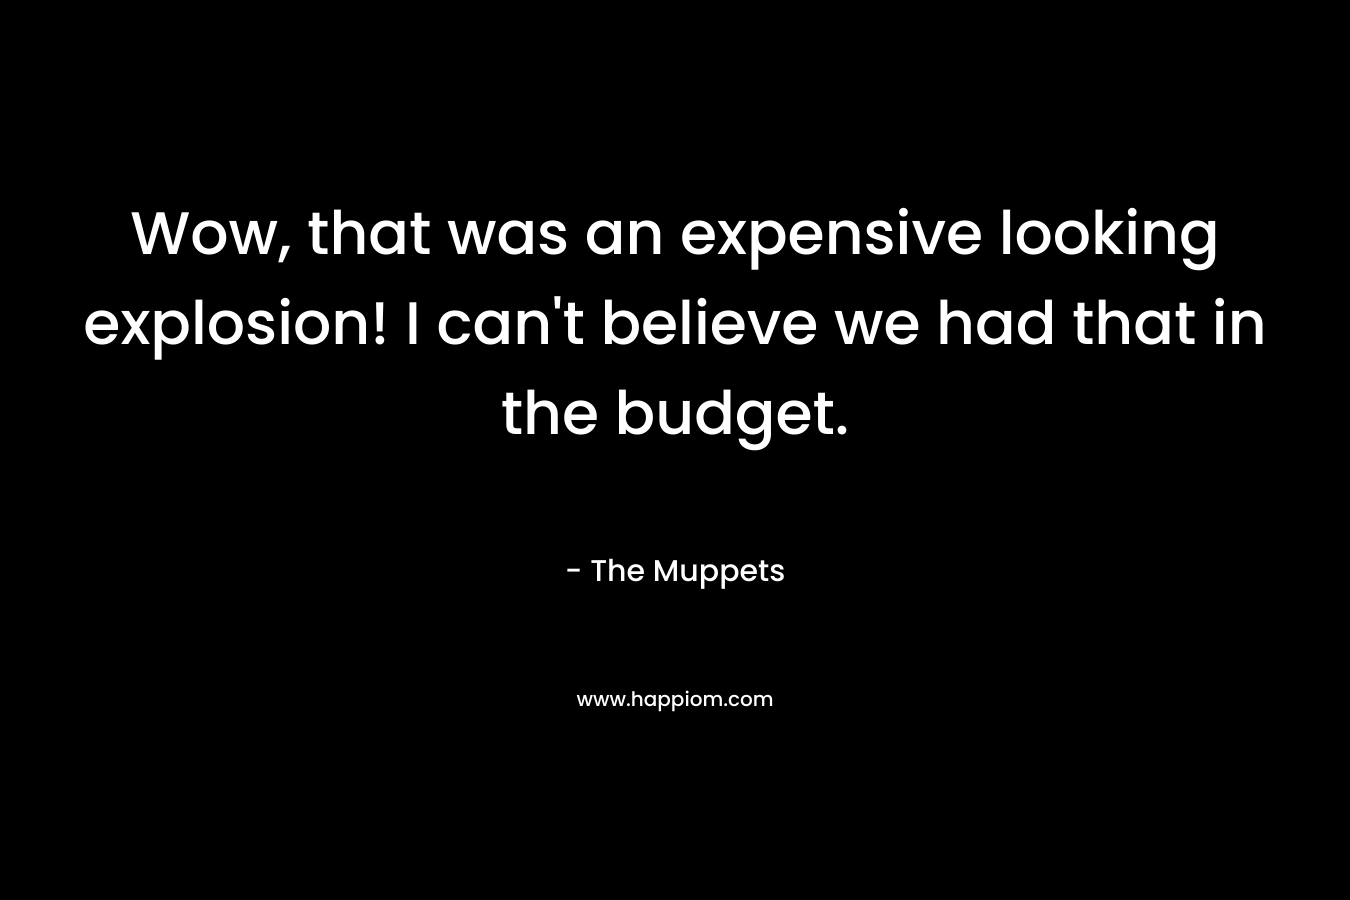 Wow, that was an expensive looking explosion! I can’t believe we had that in the budget. – The Muppets